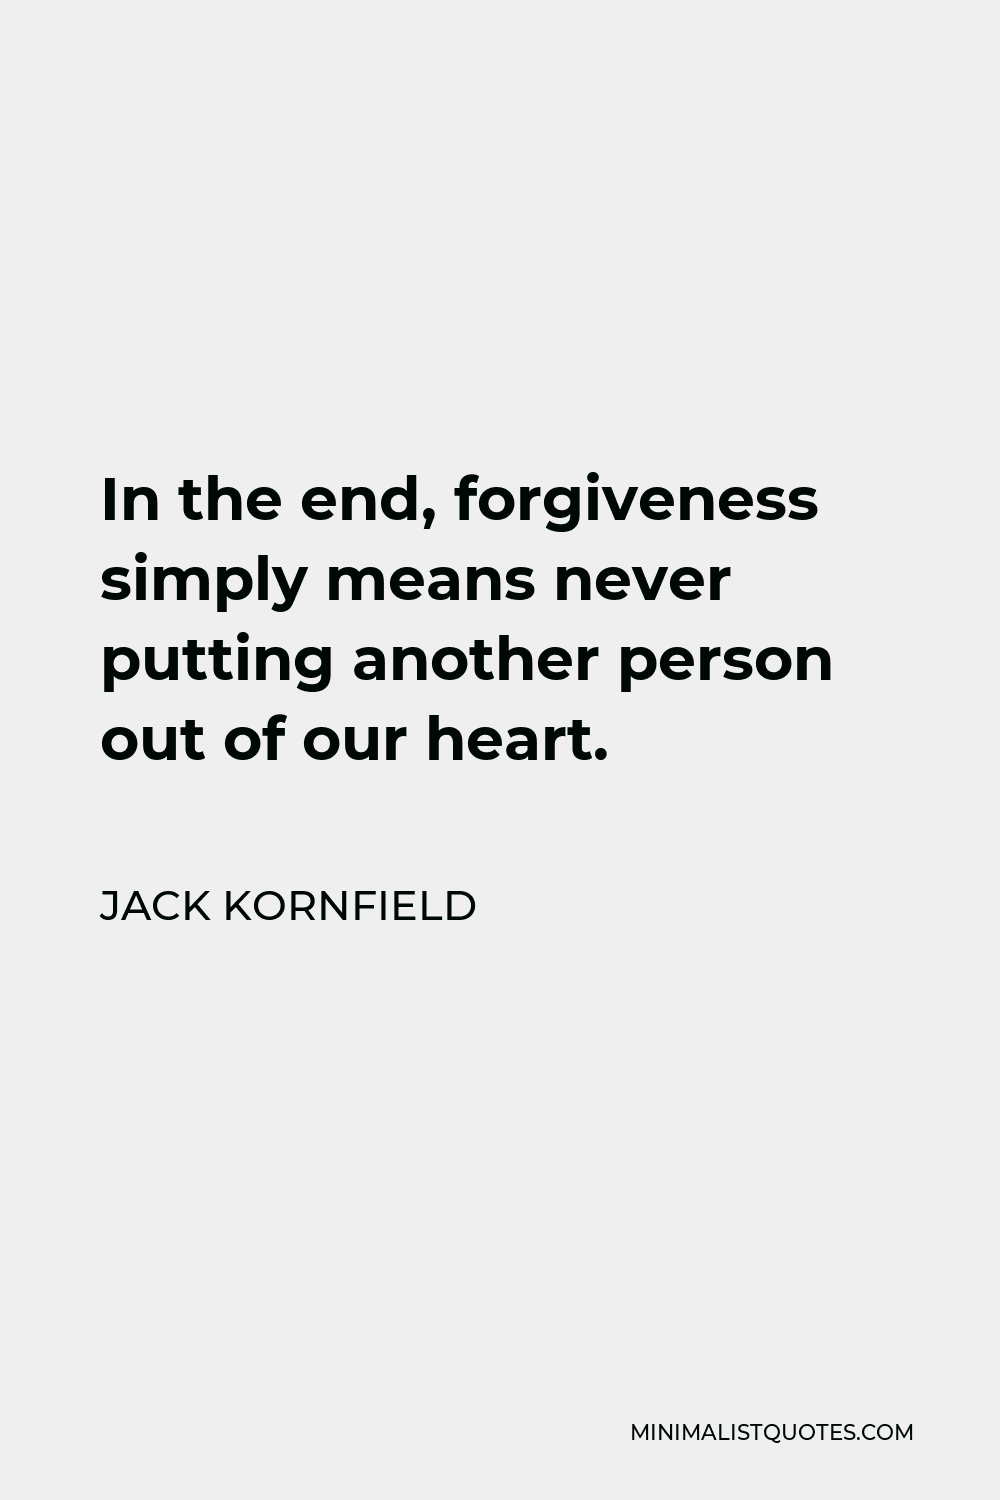 Jack Kornfield Quote - In the end, forgiveness simply means never putting another person out of our heart.